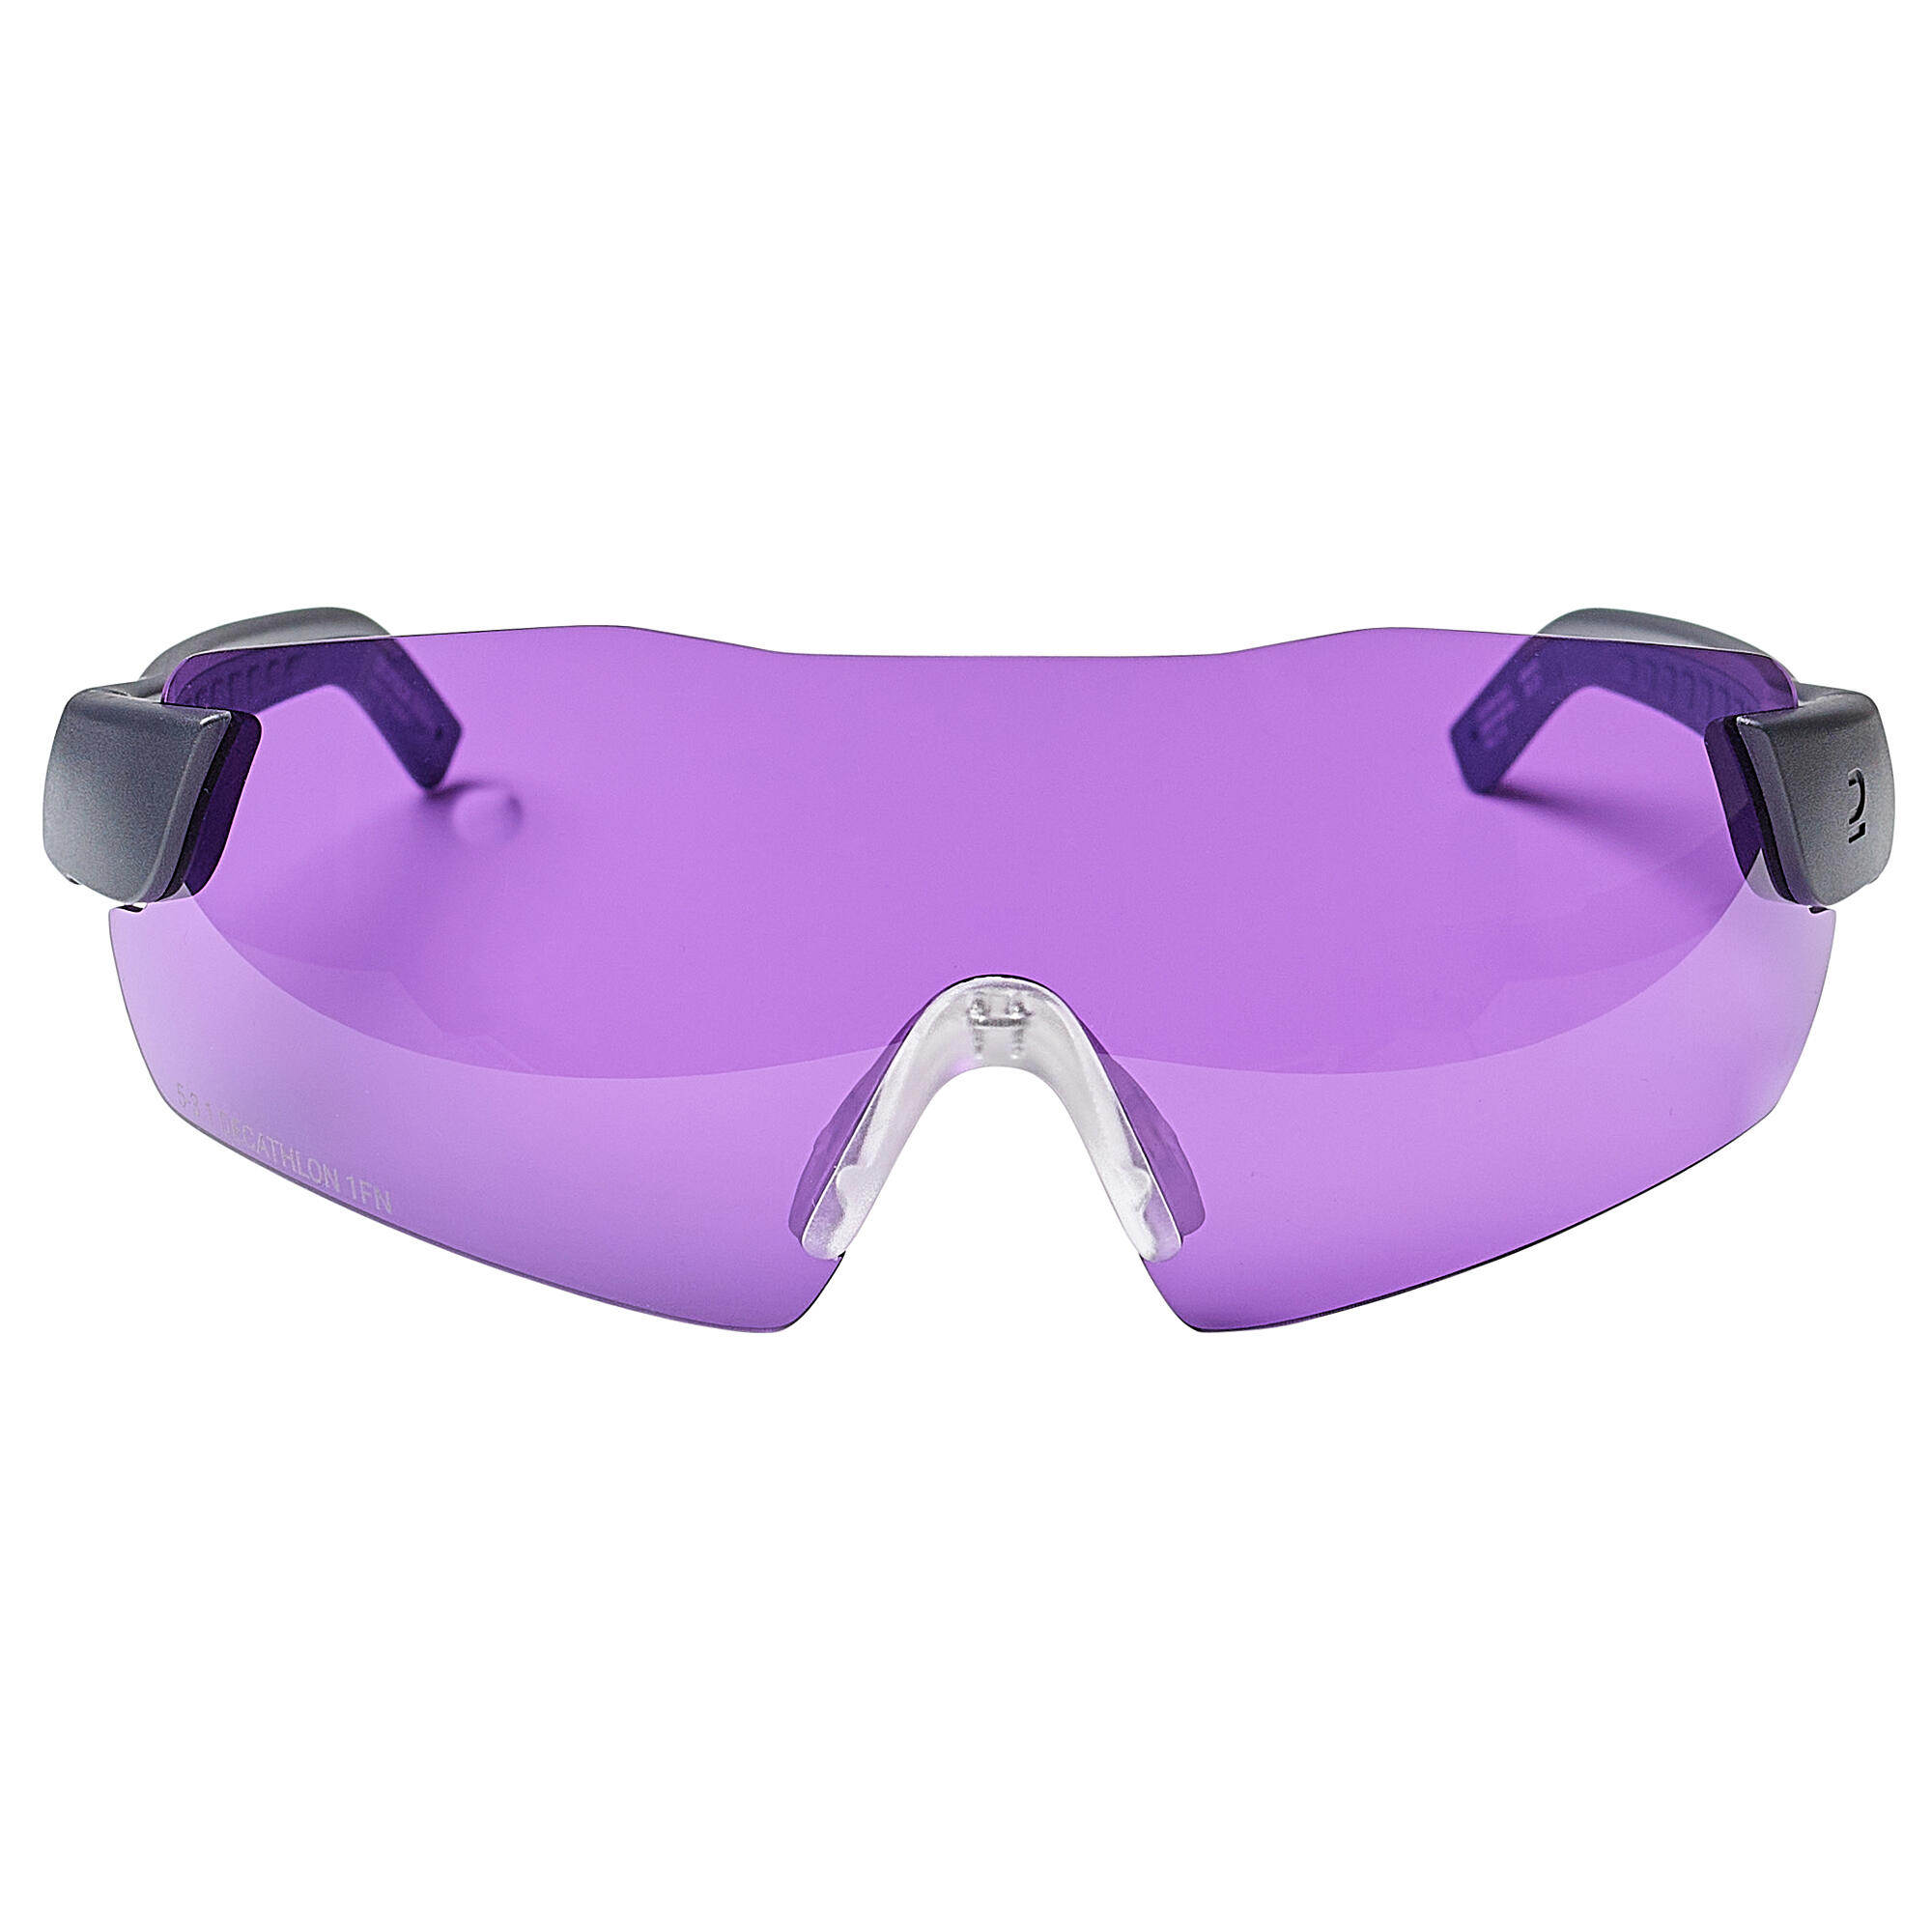 SAFETY GLASSES FOR CLAY PIGEON SHOOTING 500 PURPLE CATEGORY 3 2/6